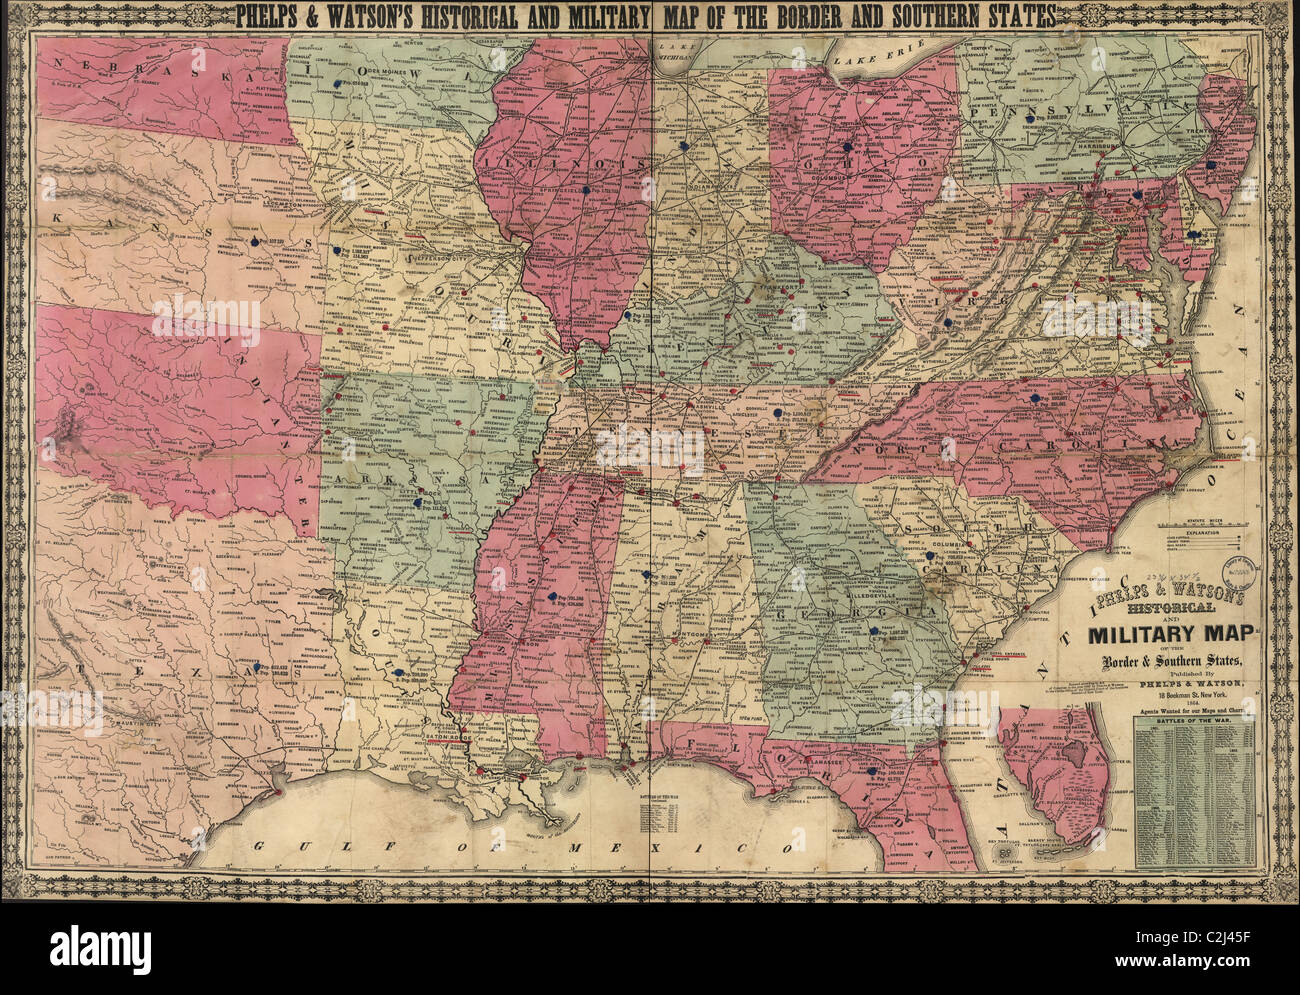 Historical & Military map of the Border & Southern States Stock Photo